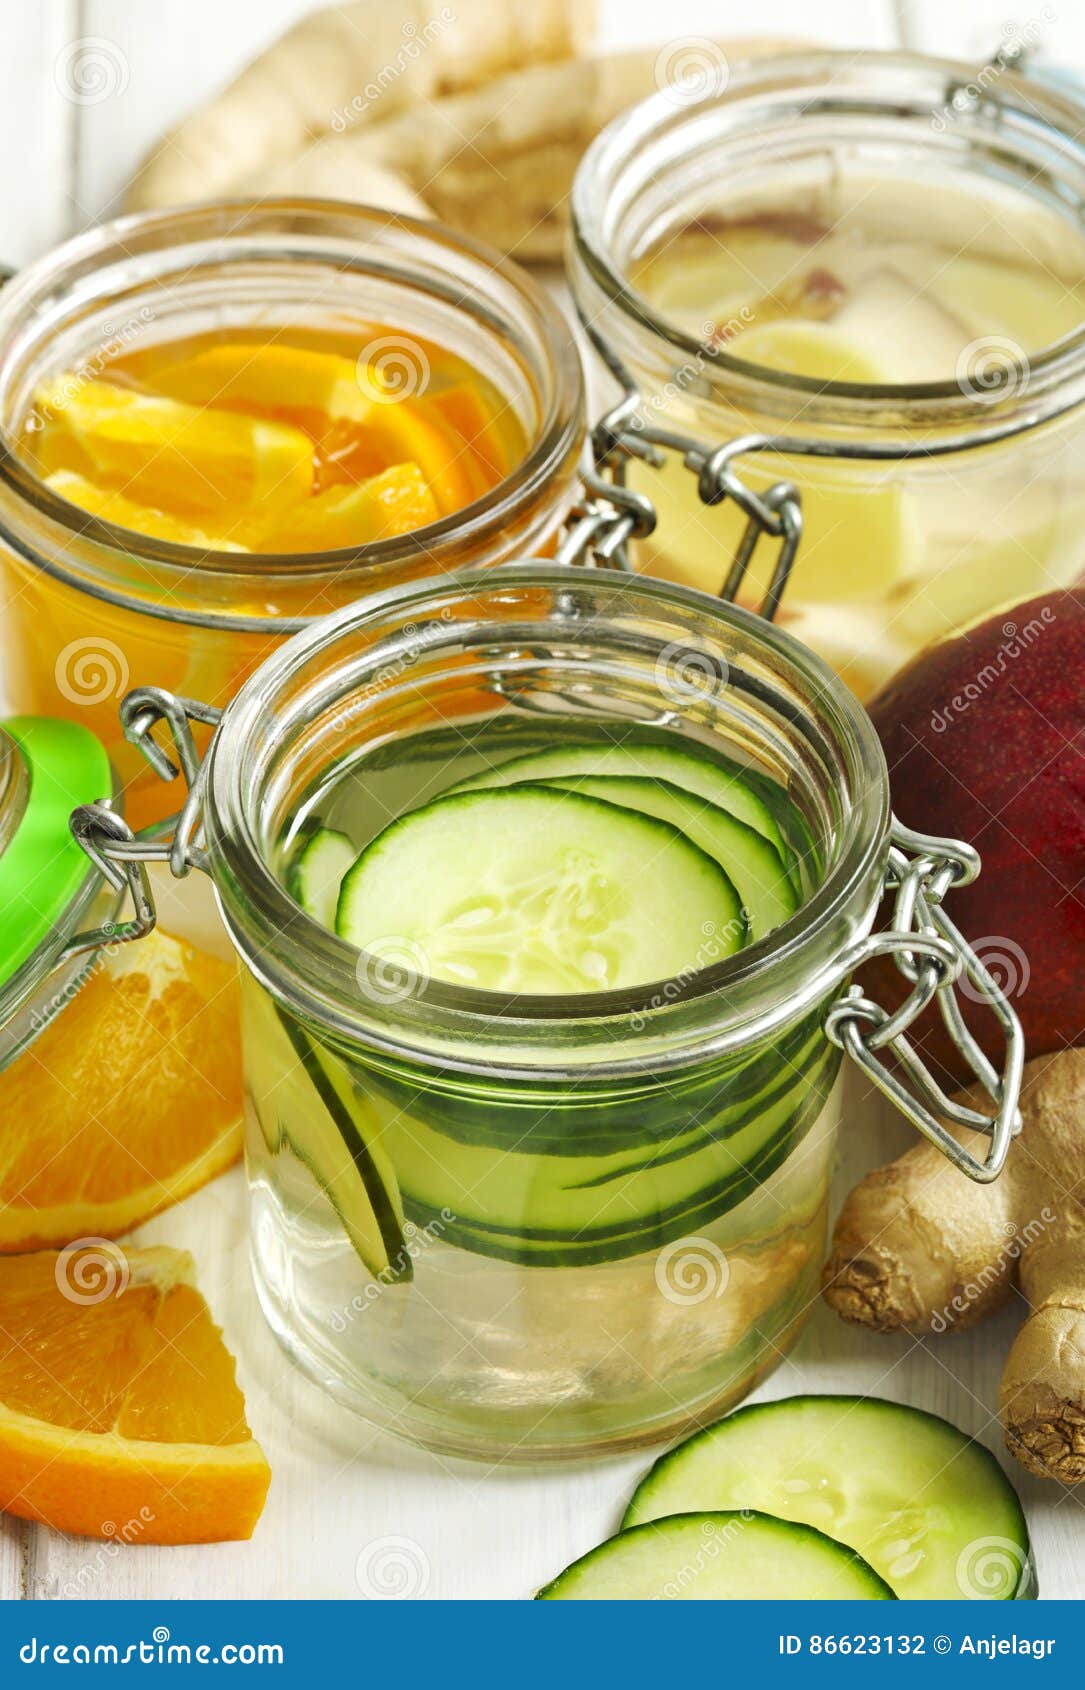 Healthy Spa Water with Fruit and Vegetable. Cucumber Spa Water, Stock